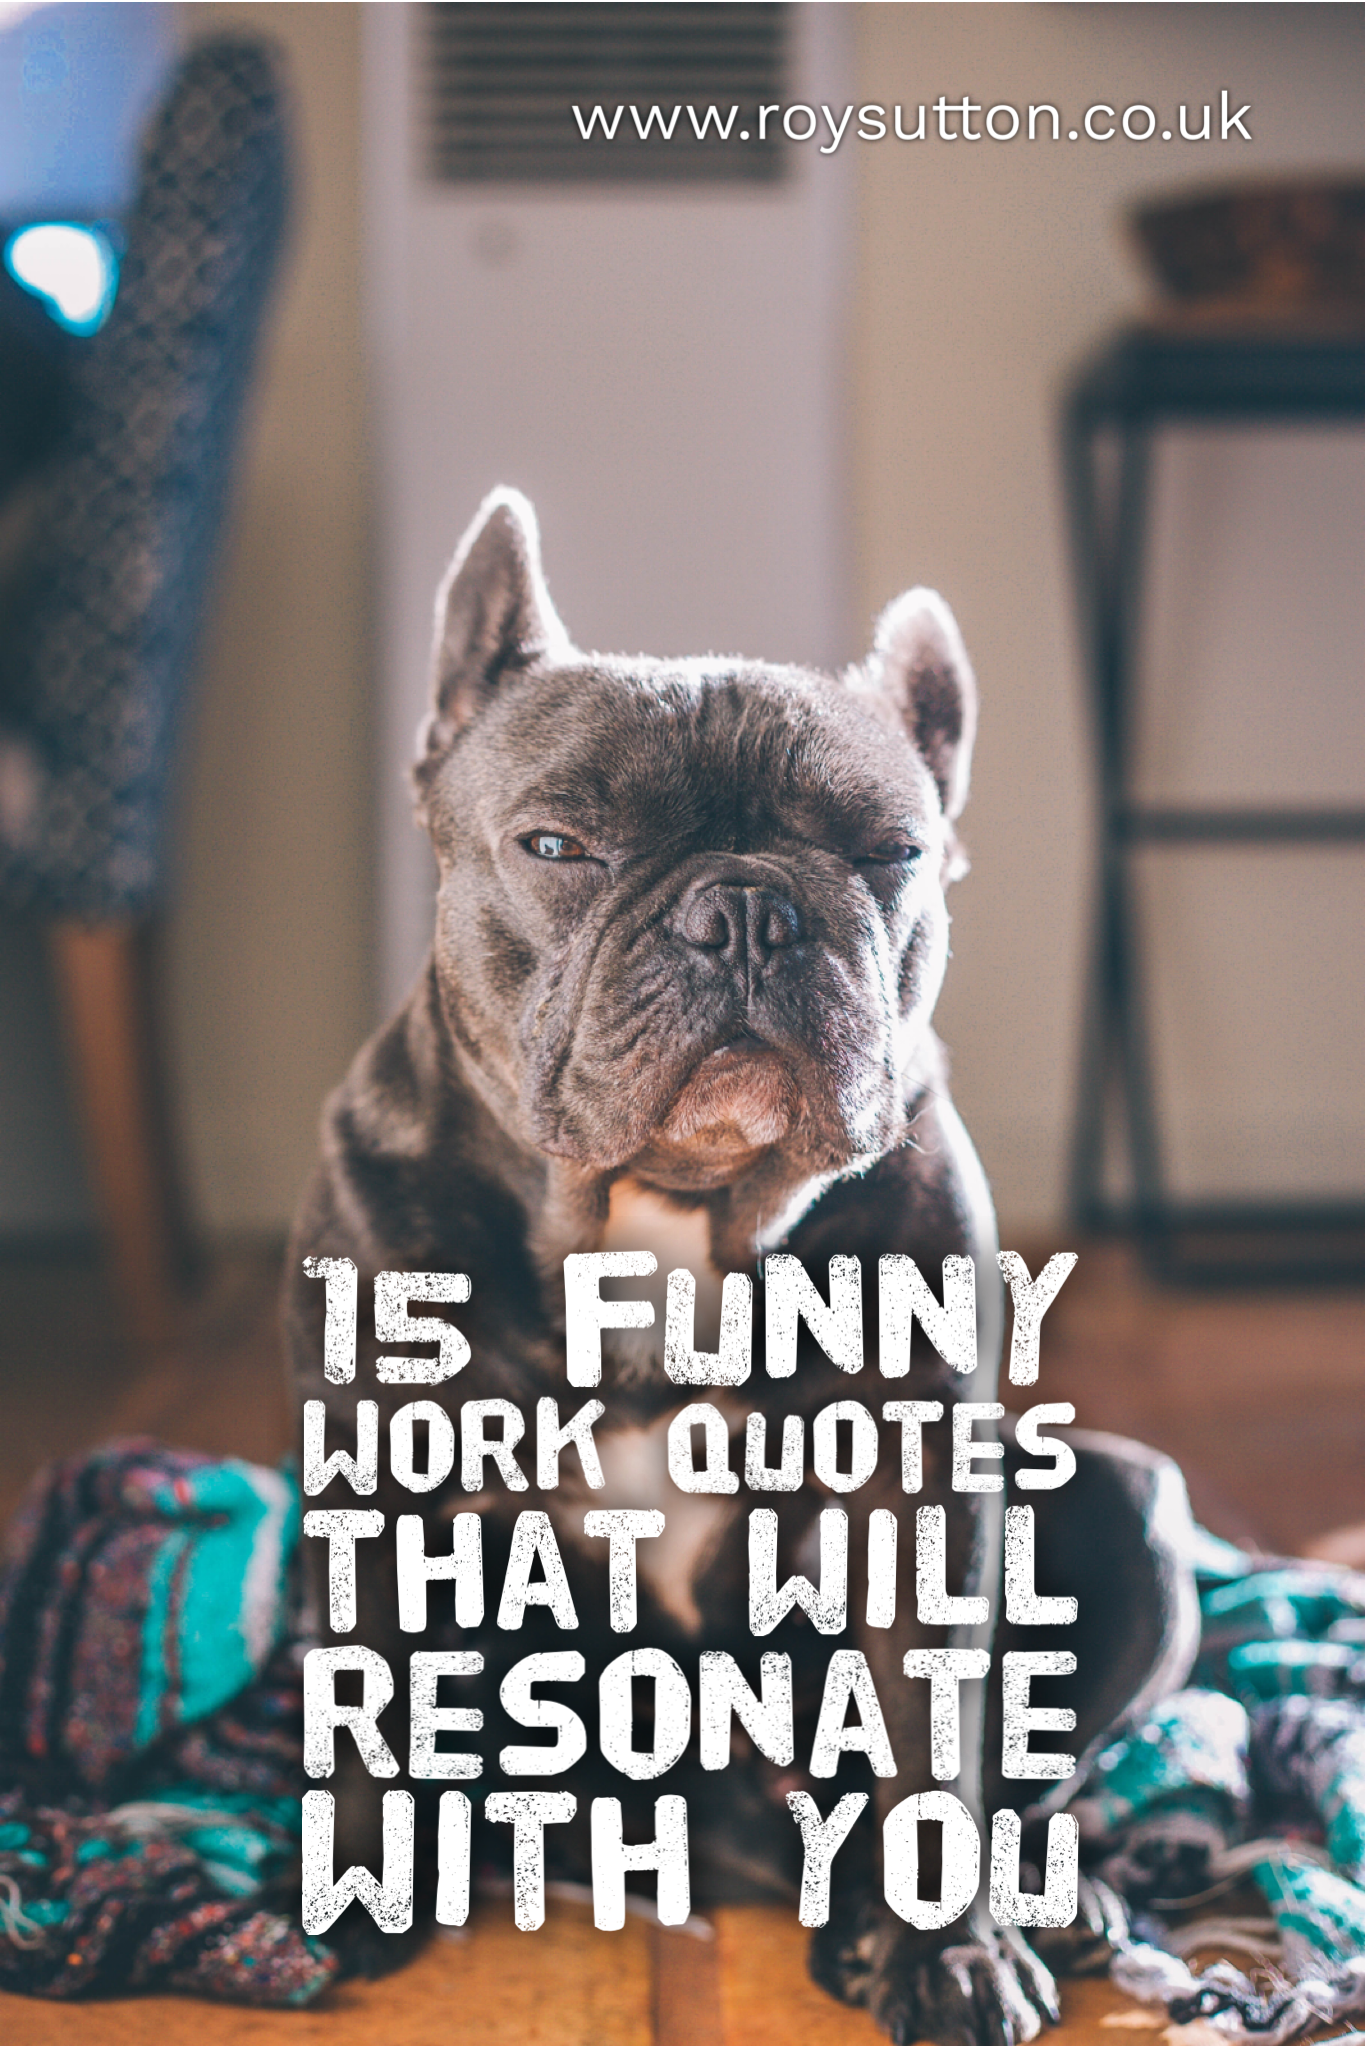 50-funny-work-quotes-and-sayings-2022-photos